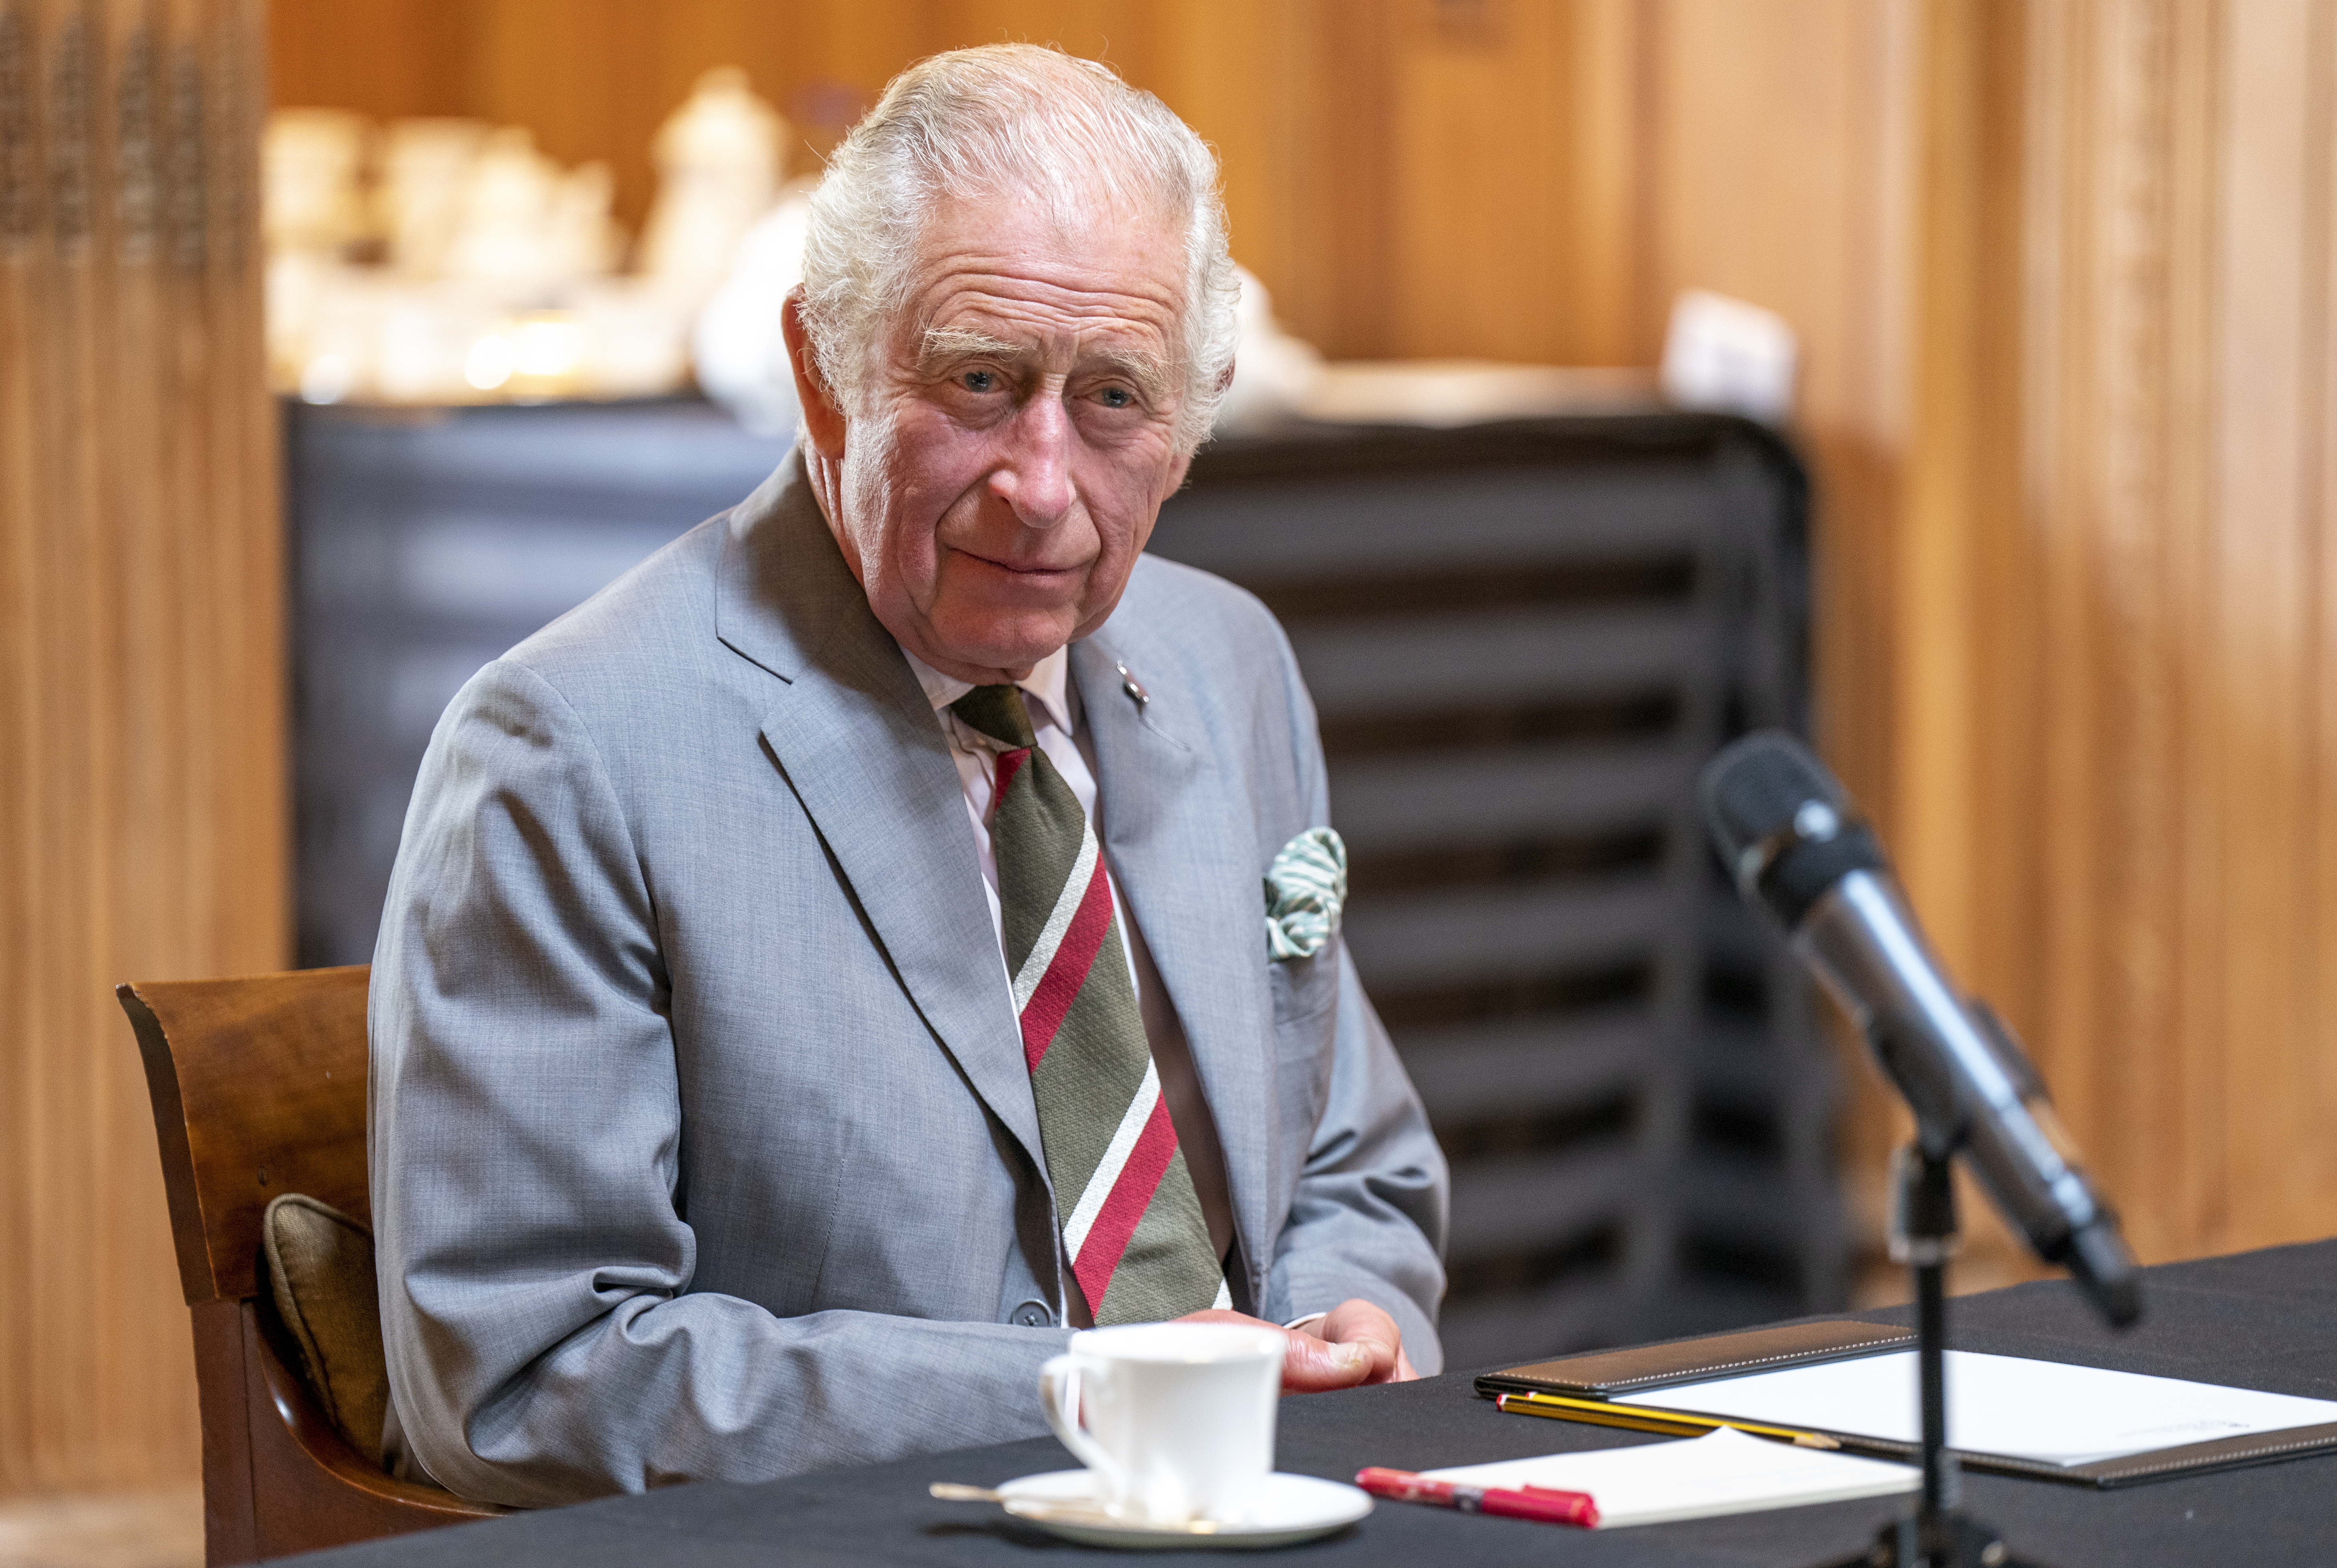 Prince Charles, in a gray suit and green-and-red striped tie, sits at a table in front of a microphone.